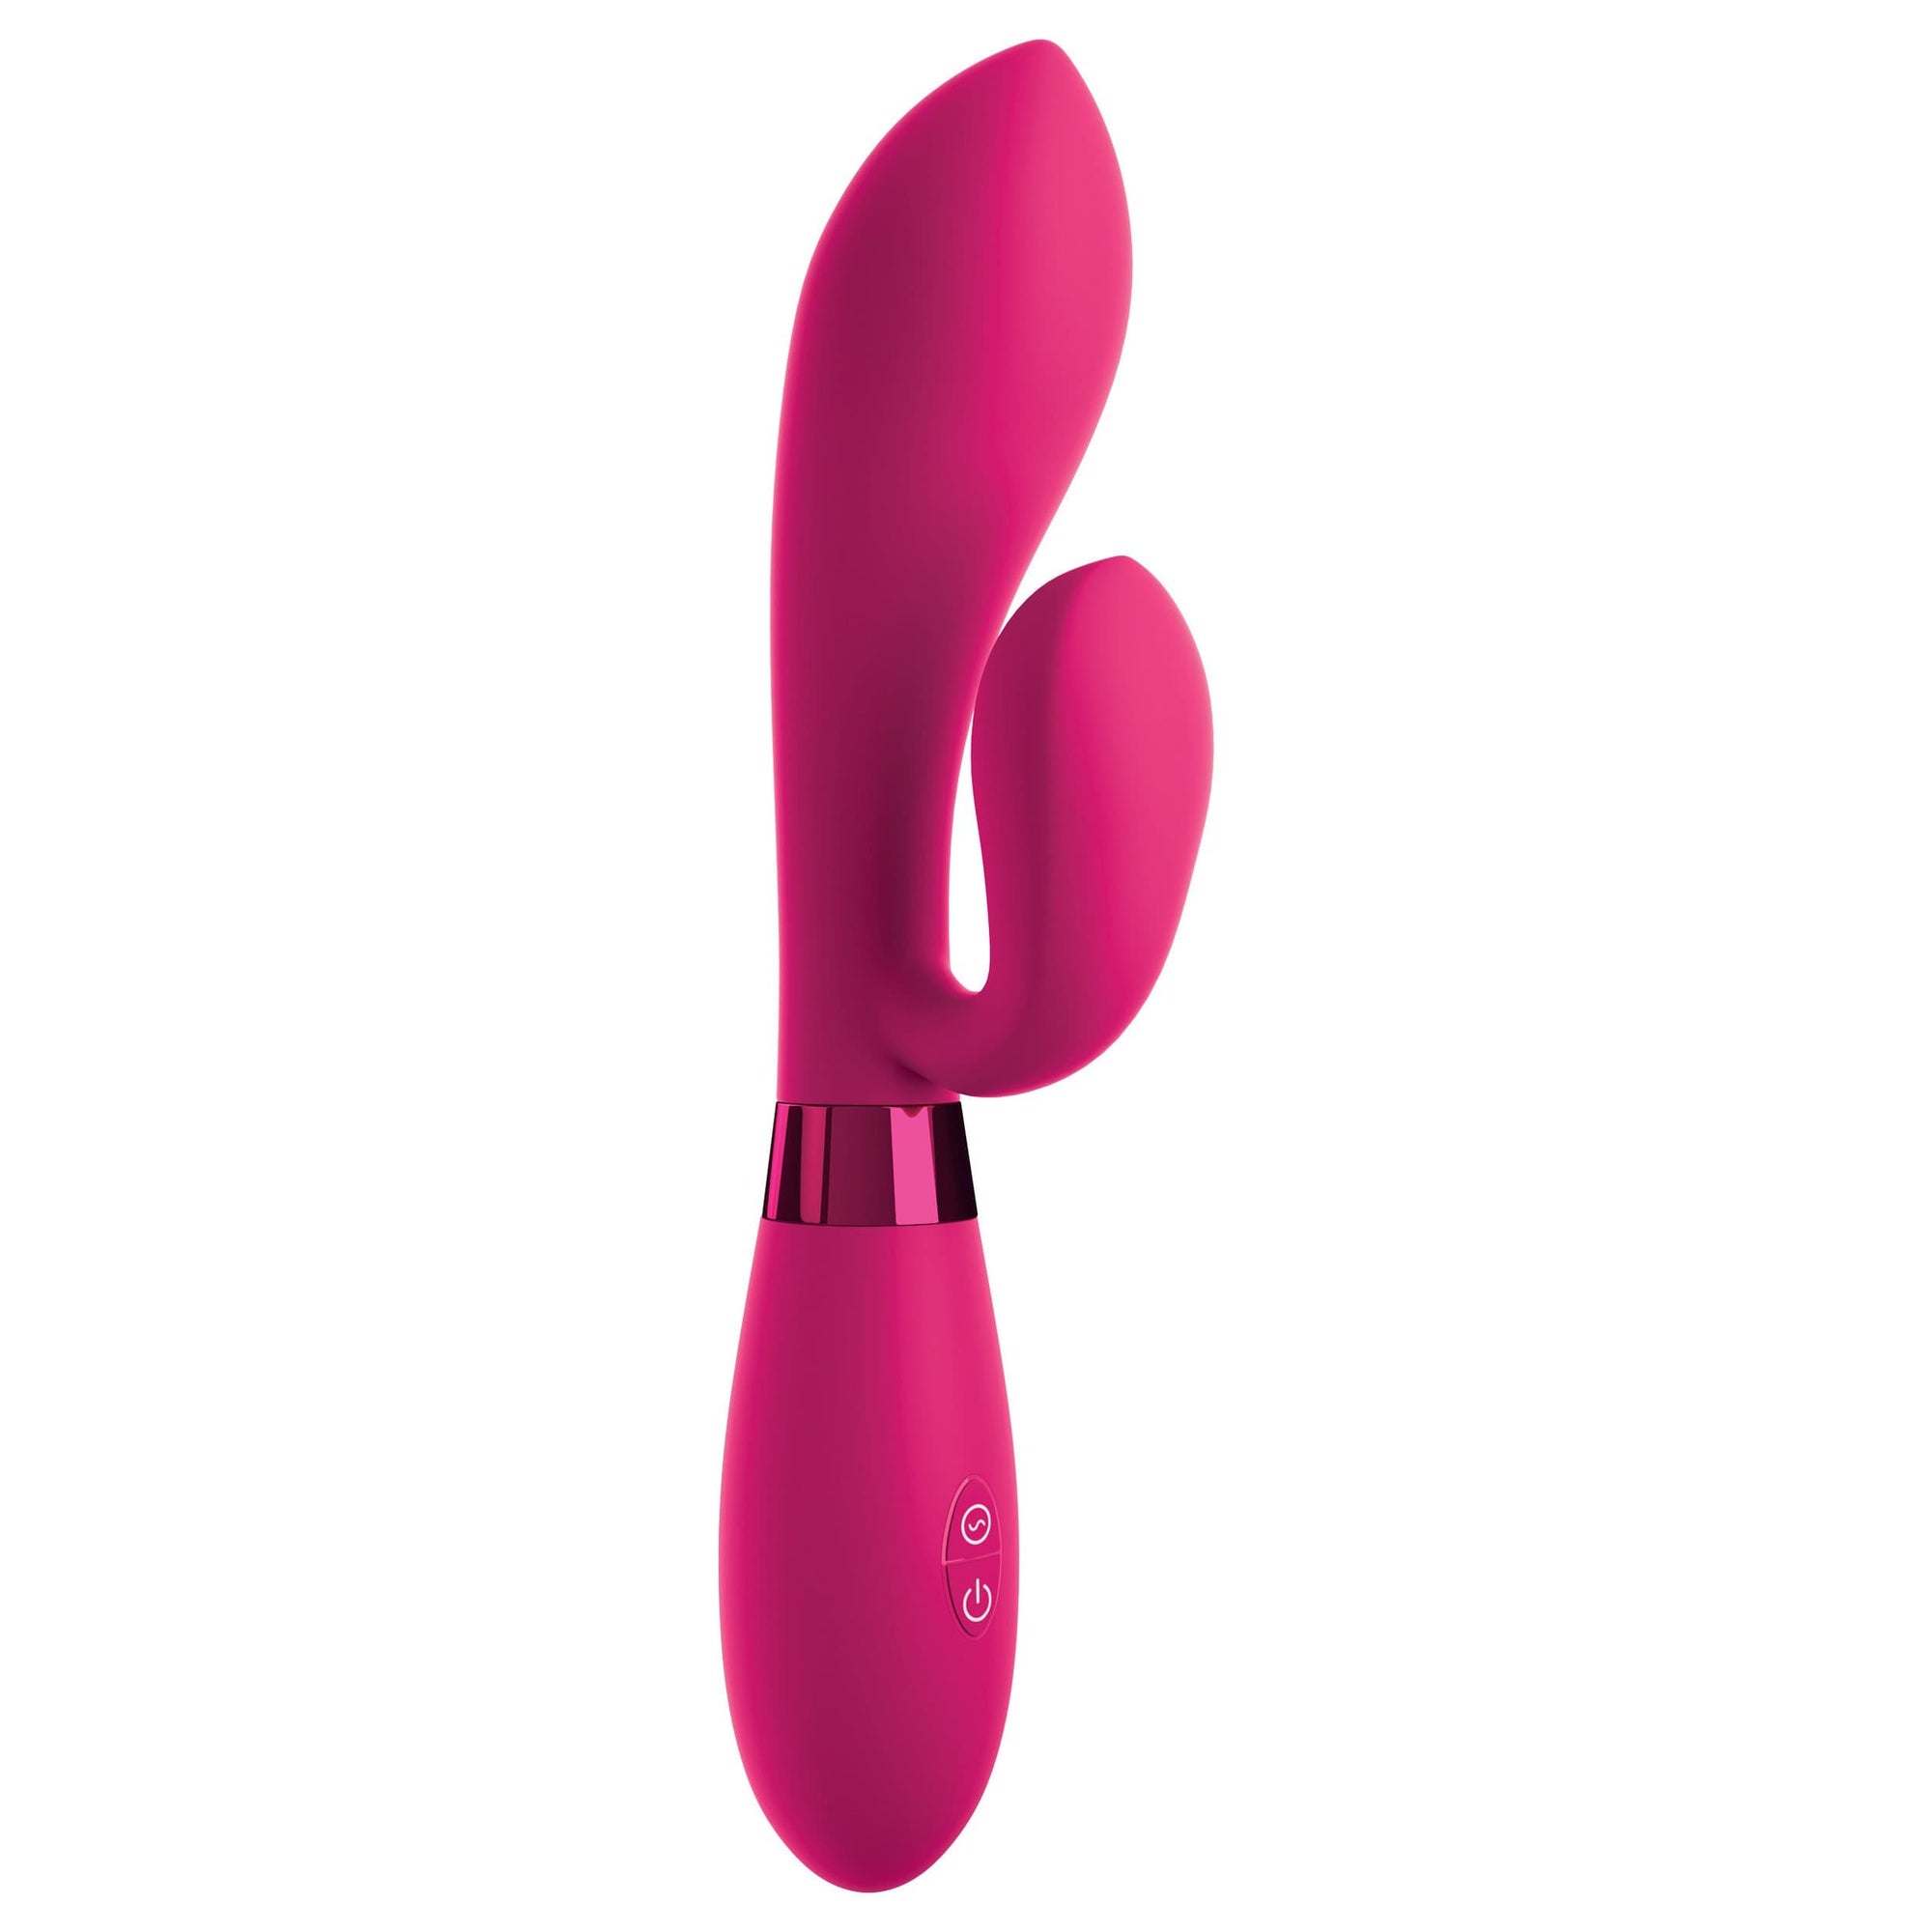 Pipedream - OMG Rabbits #Mood Silicone Vibrator (Pink) Rabbit Dildo (Vibration) Rechargeable 319978350 CherryAffairs